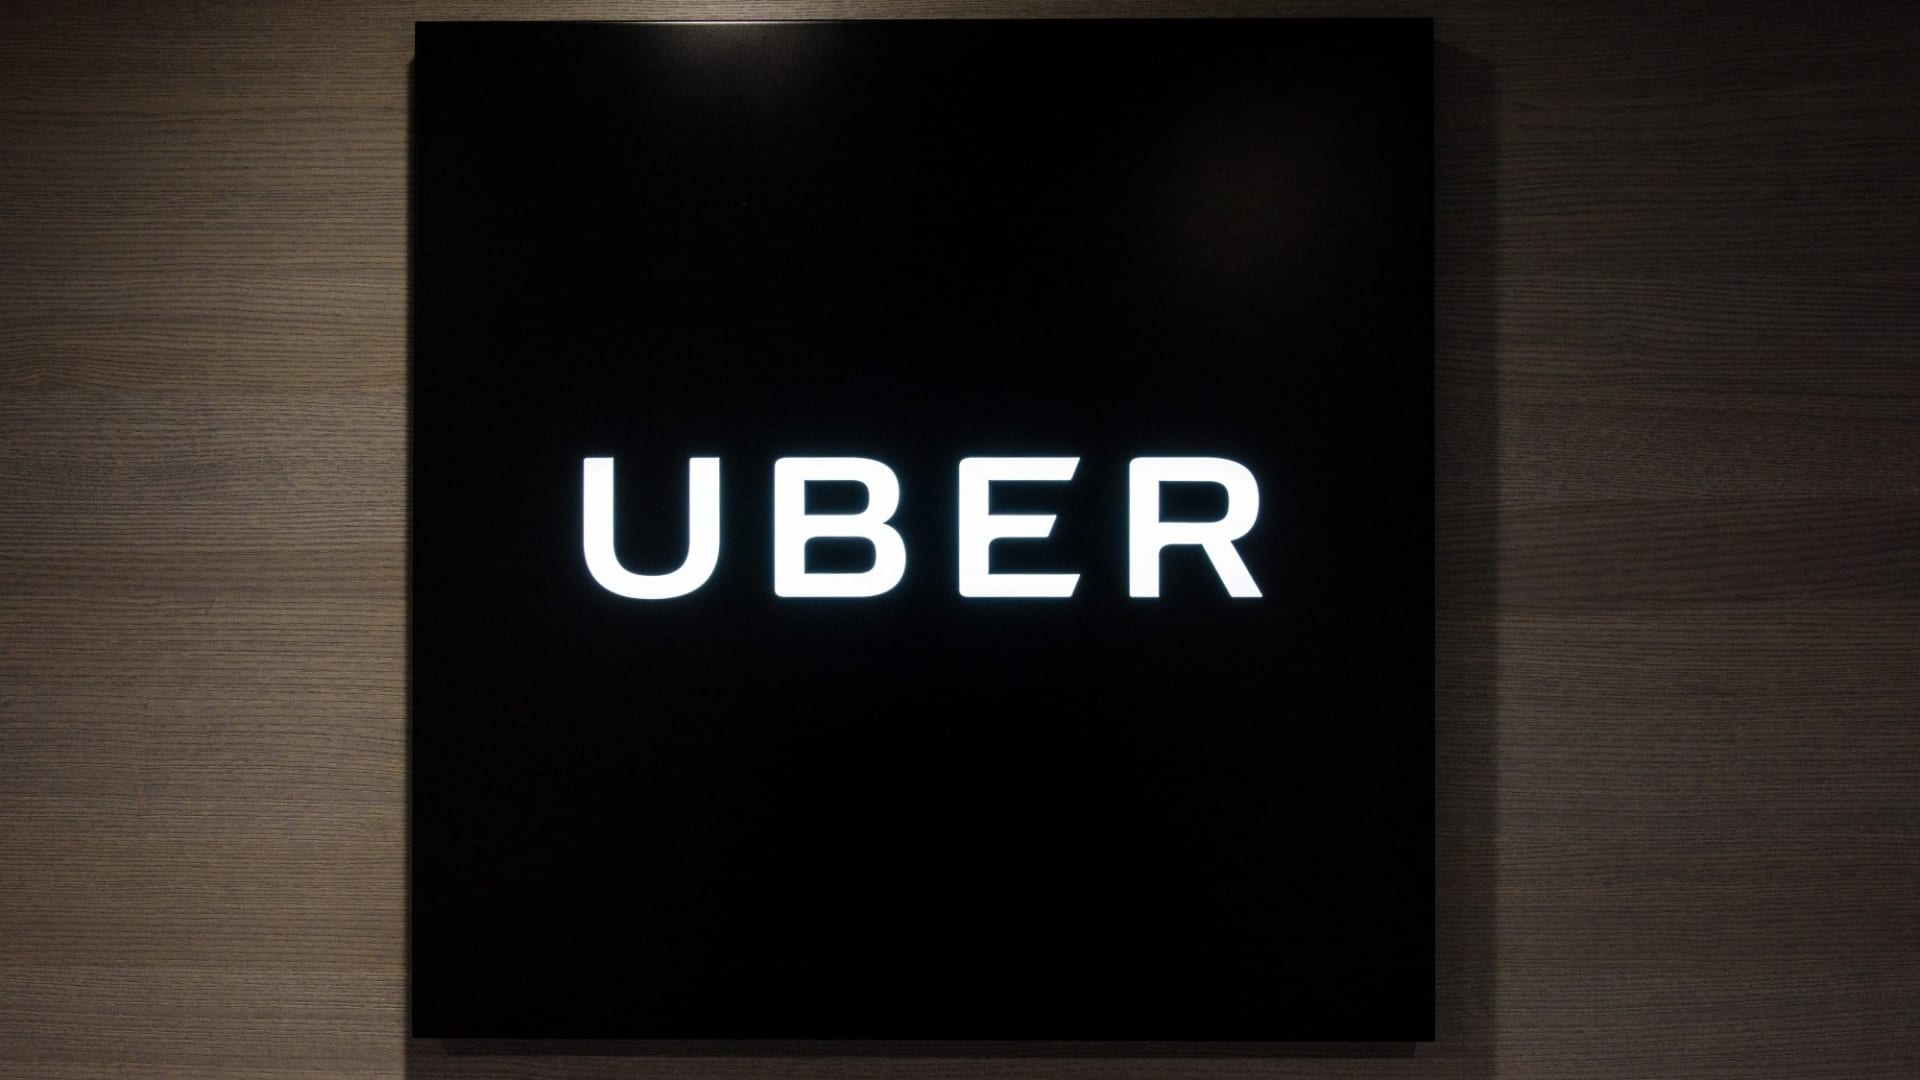 Uber Just Lost $1.8 Billion. Why That's the Best News the Company Has Gotten in a While